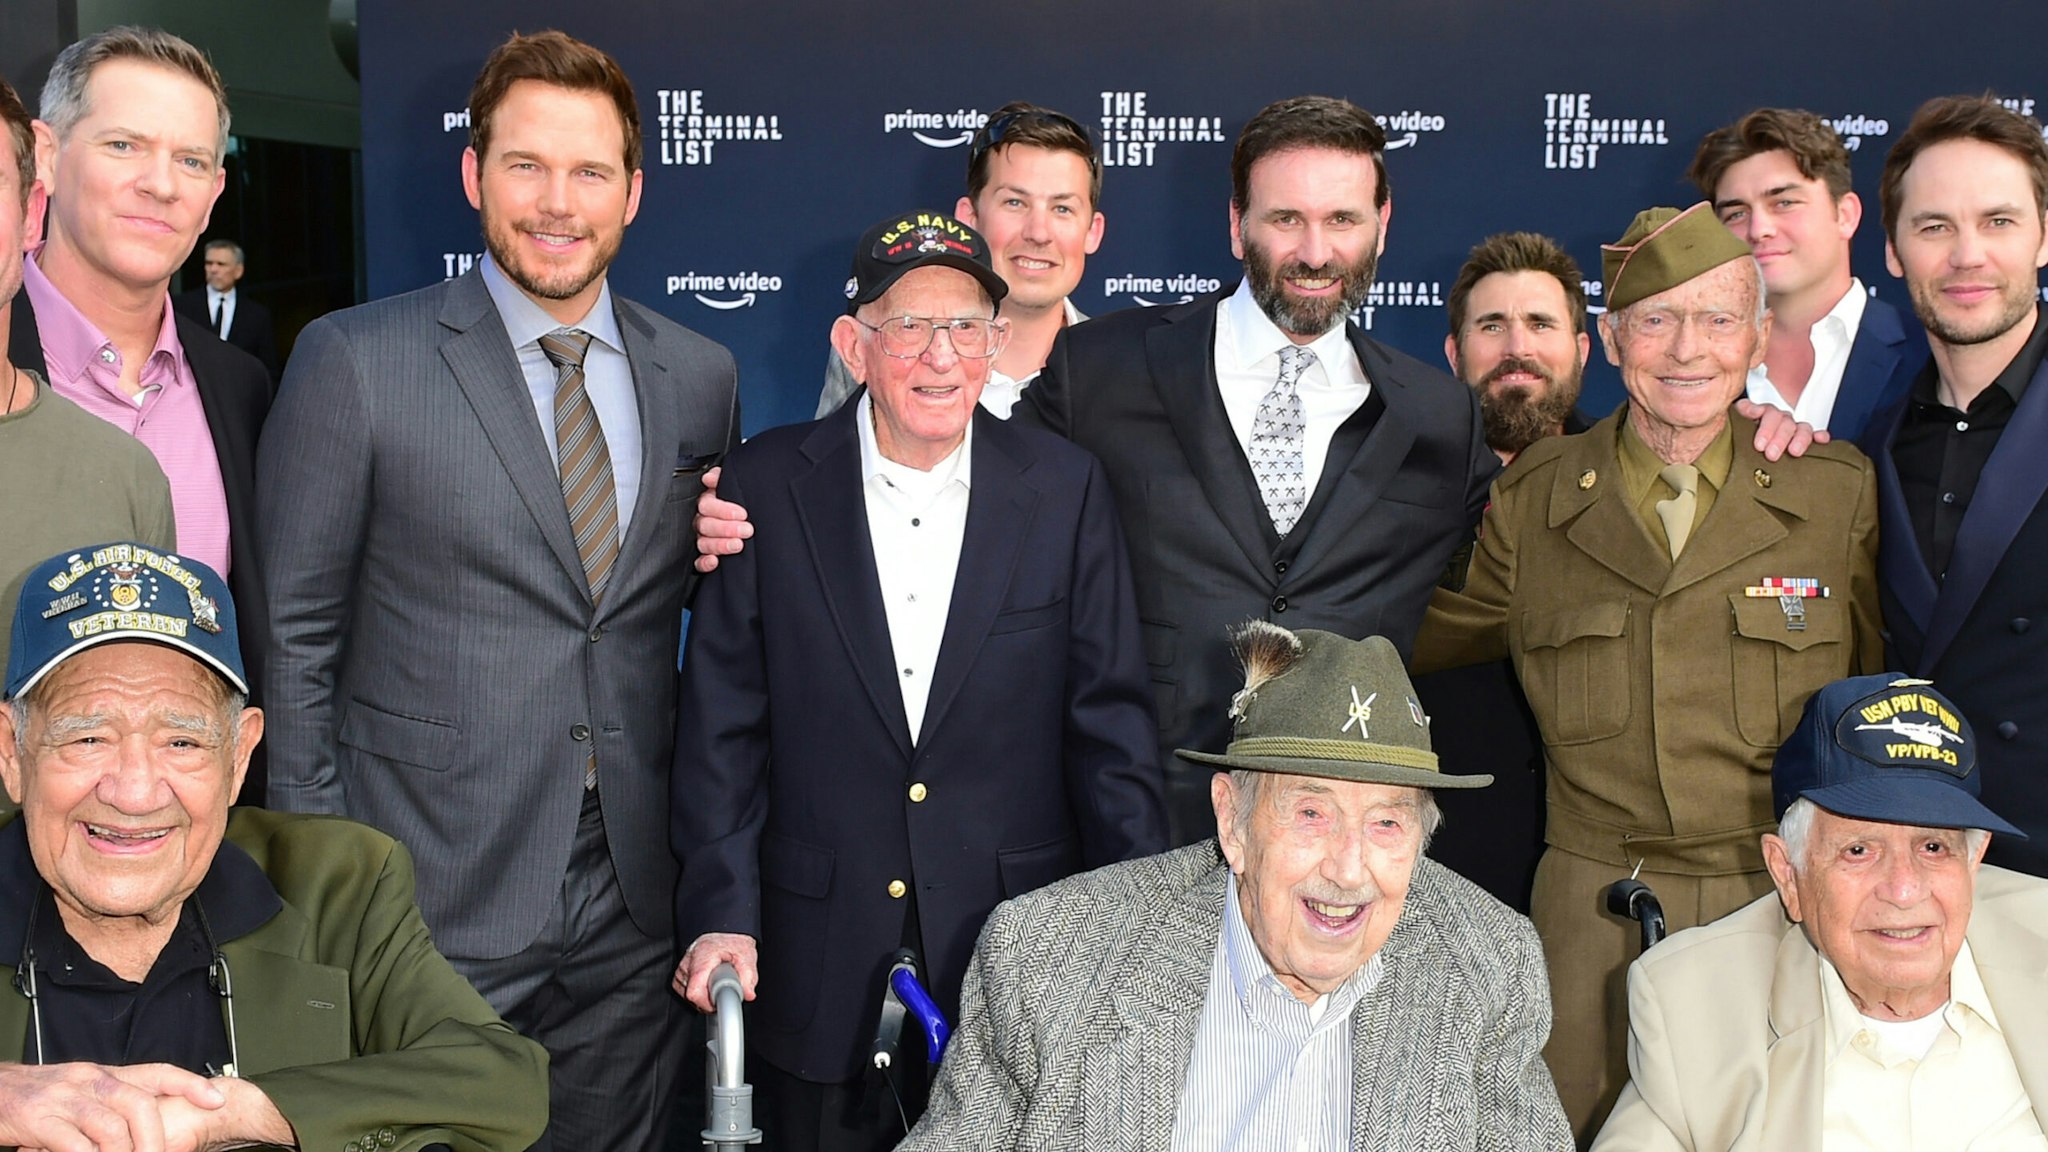 (L-R) Nate Boyer, WWII Veteran Larry Stevens, David DiGilio, Chris Pratt, WWII Veteran Pete Corrao, Jack Carr, WWII Veteran Bruce Campbell, Jared Shaw, WWII Veteran Andre Chappaz, WWII Veteran Art Del Rey, and Taylor Kitsch attend Prime Video's "The Terminal List" Red Carpet Premiere on June 22, 2022 in Los Angeles, California.